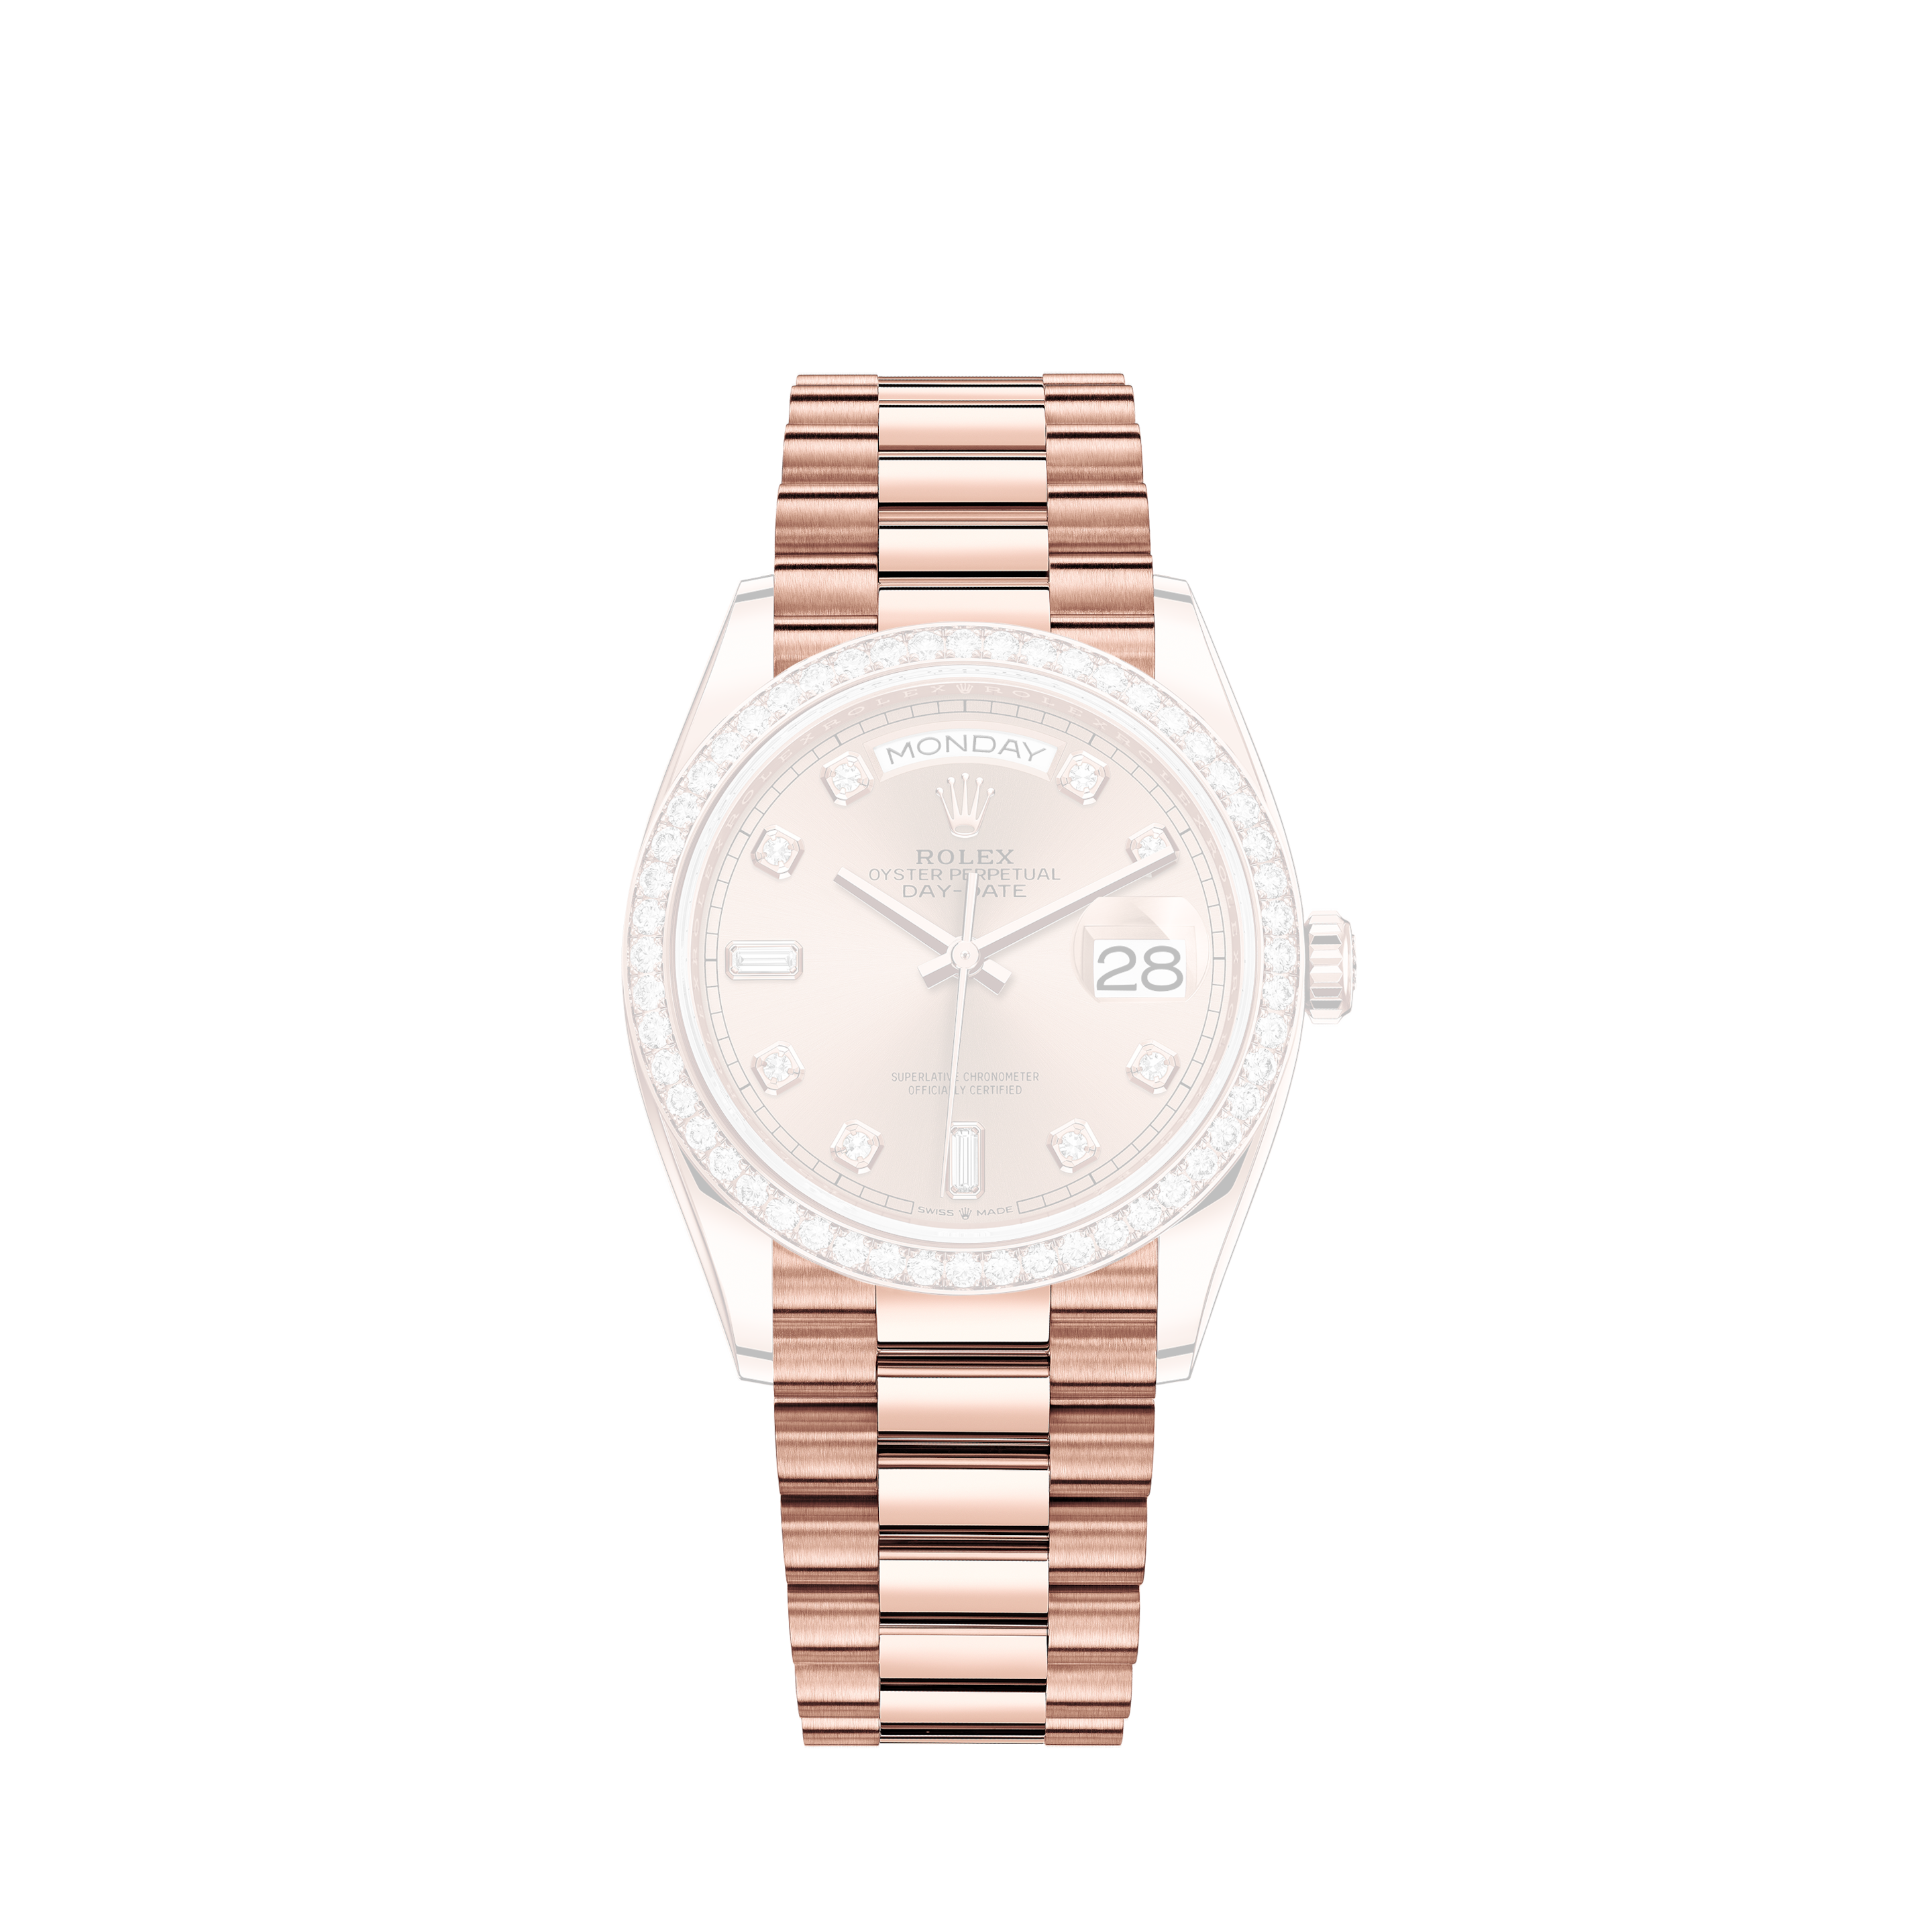 Rolex Ladies Rolex 26mm Datejust Two Tone Diamond Bezel & Lugs Slate Grey Color Dial with 8 + 2 AccentRolex Ladies Rolex 26mm Datejust Two Tone Diamond Bezel & Lugs Slate Grey Roman Numeral Dial